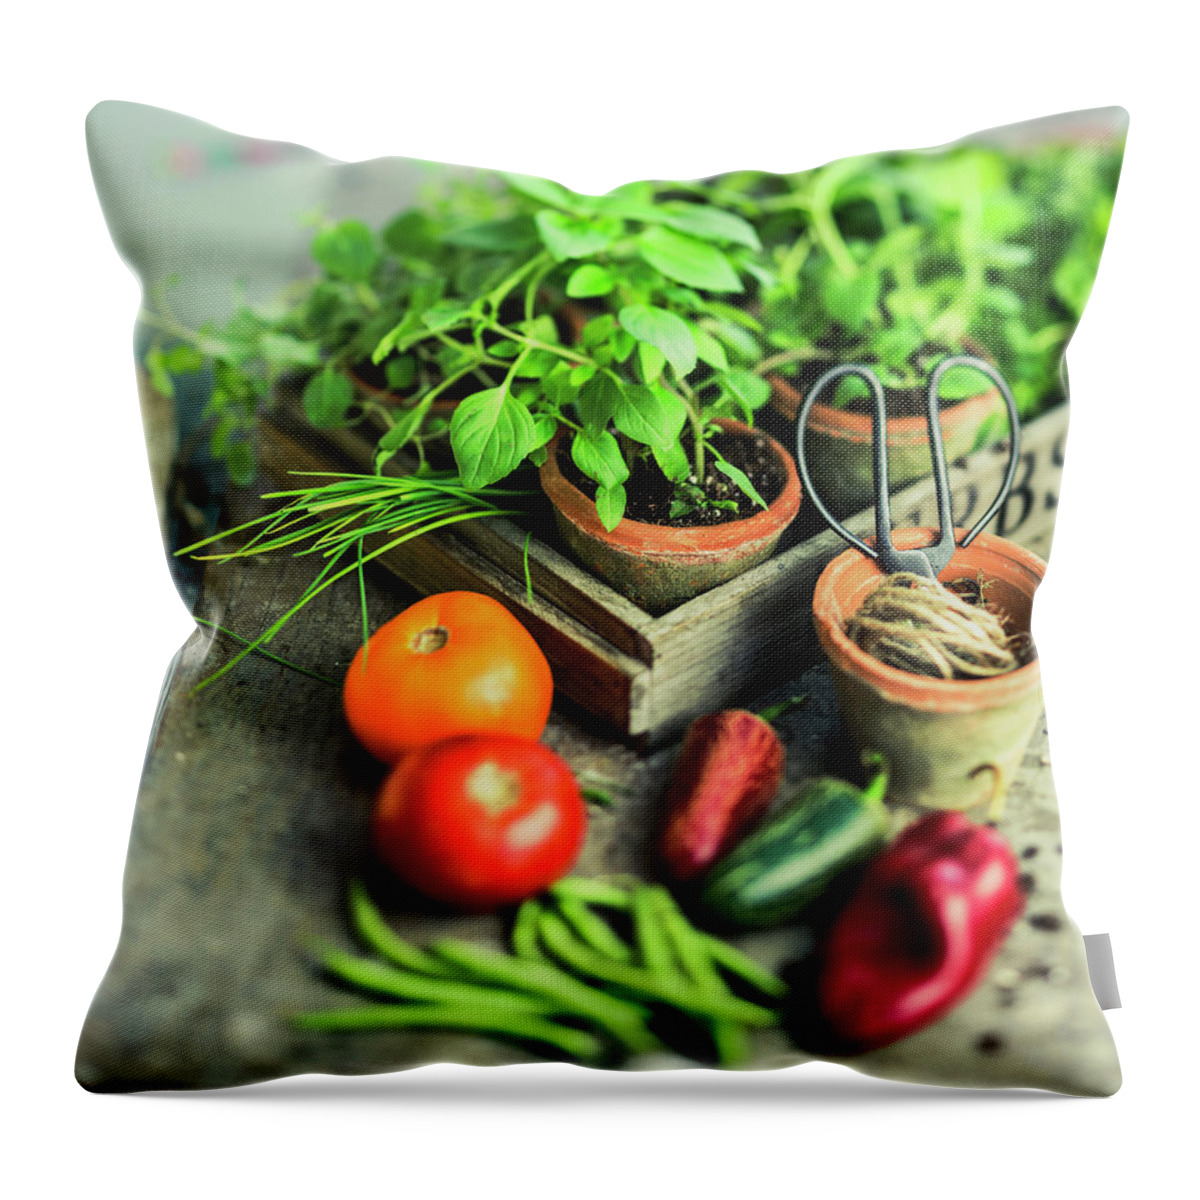 Red Bell Pepper Throw Pillow featuring the photograph Vegetables And Herbs by Thepalmer